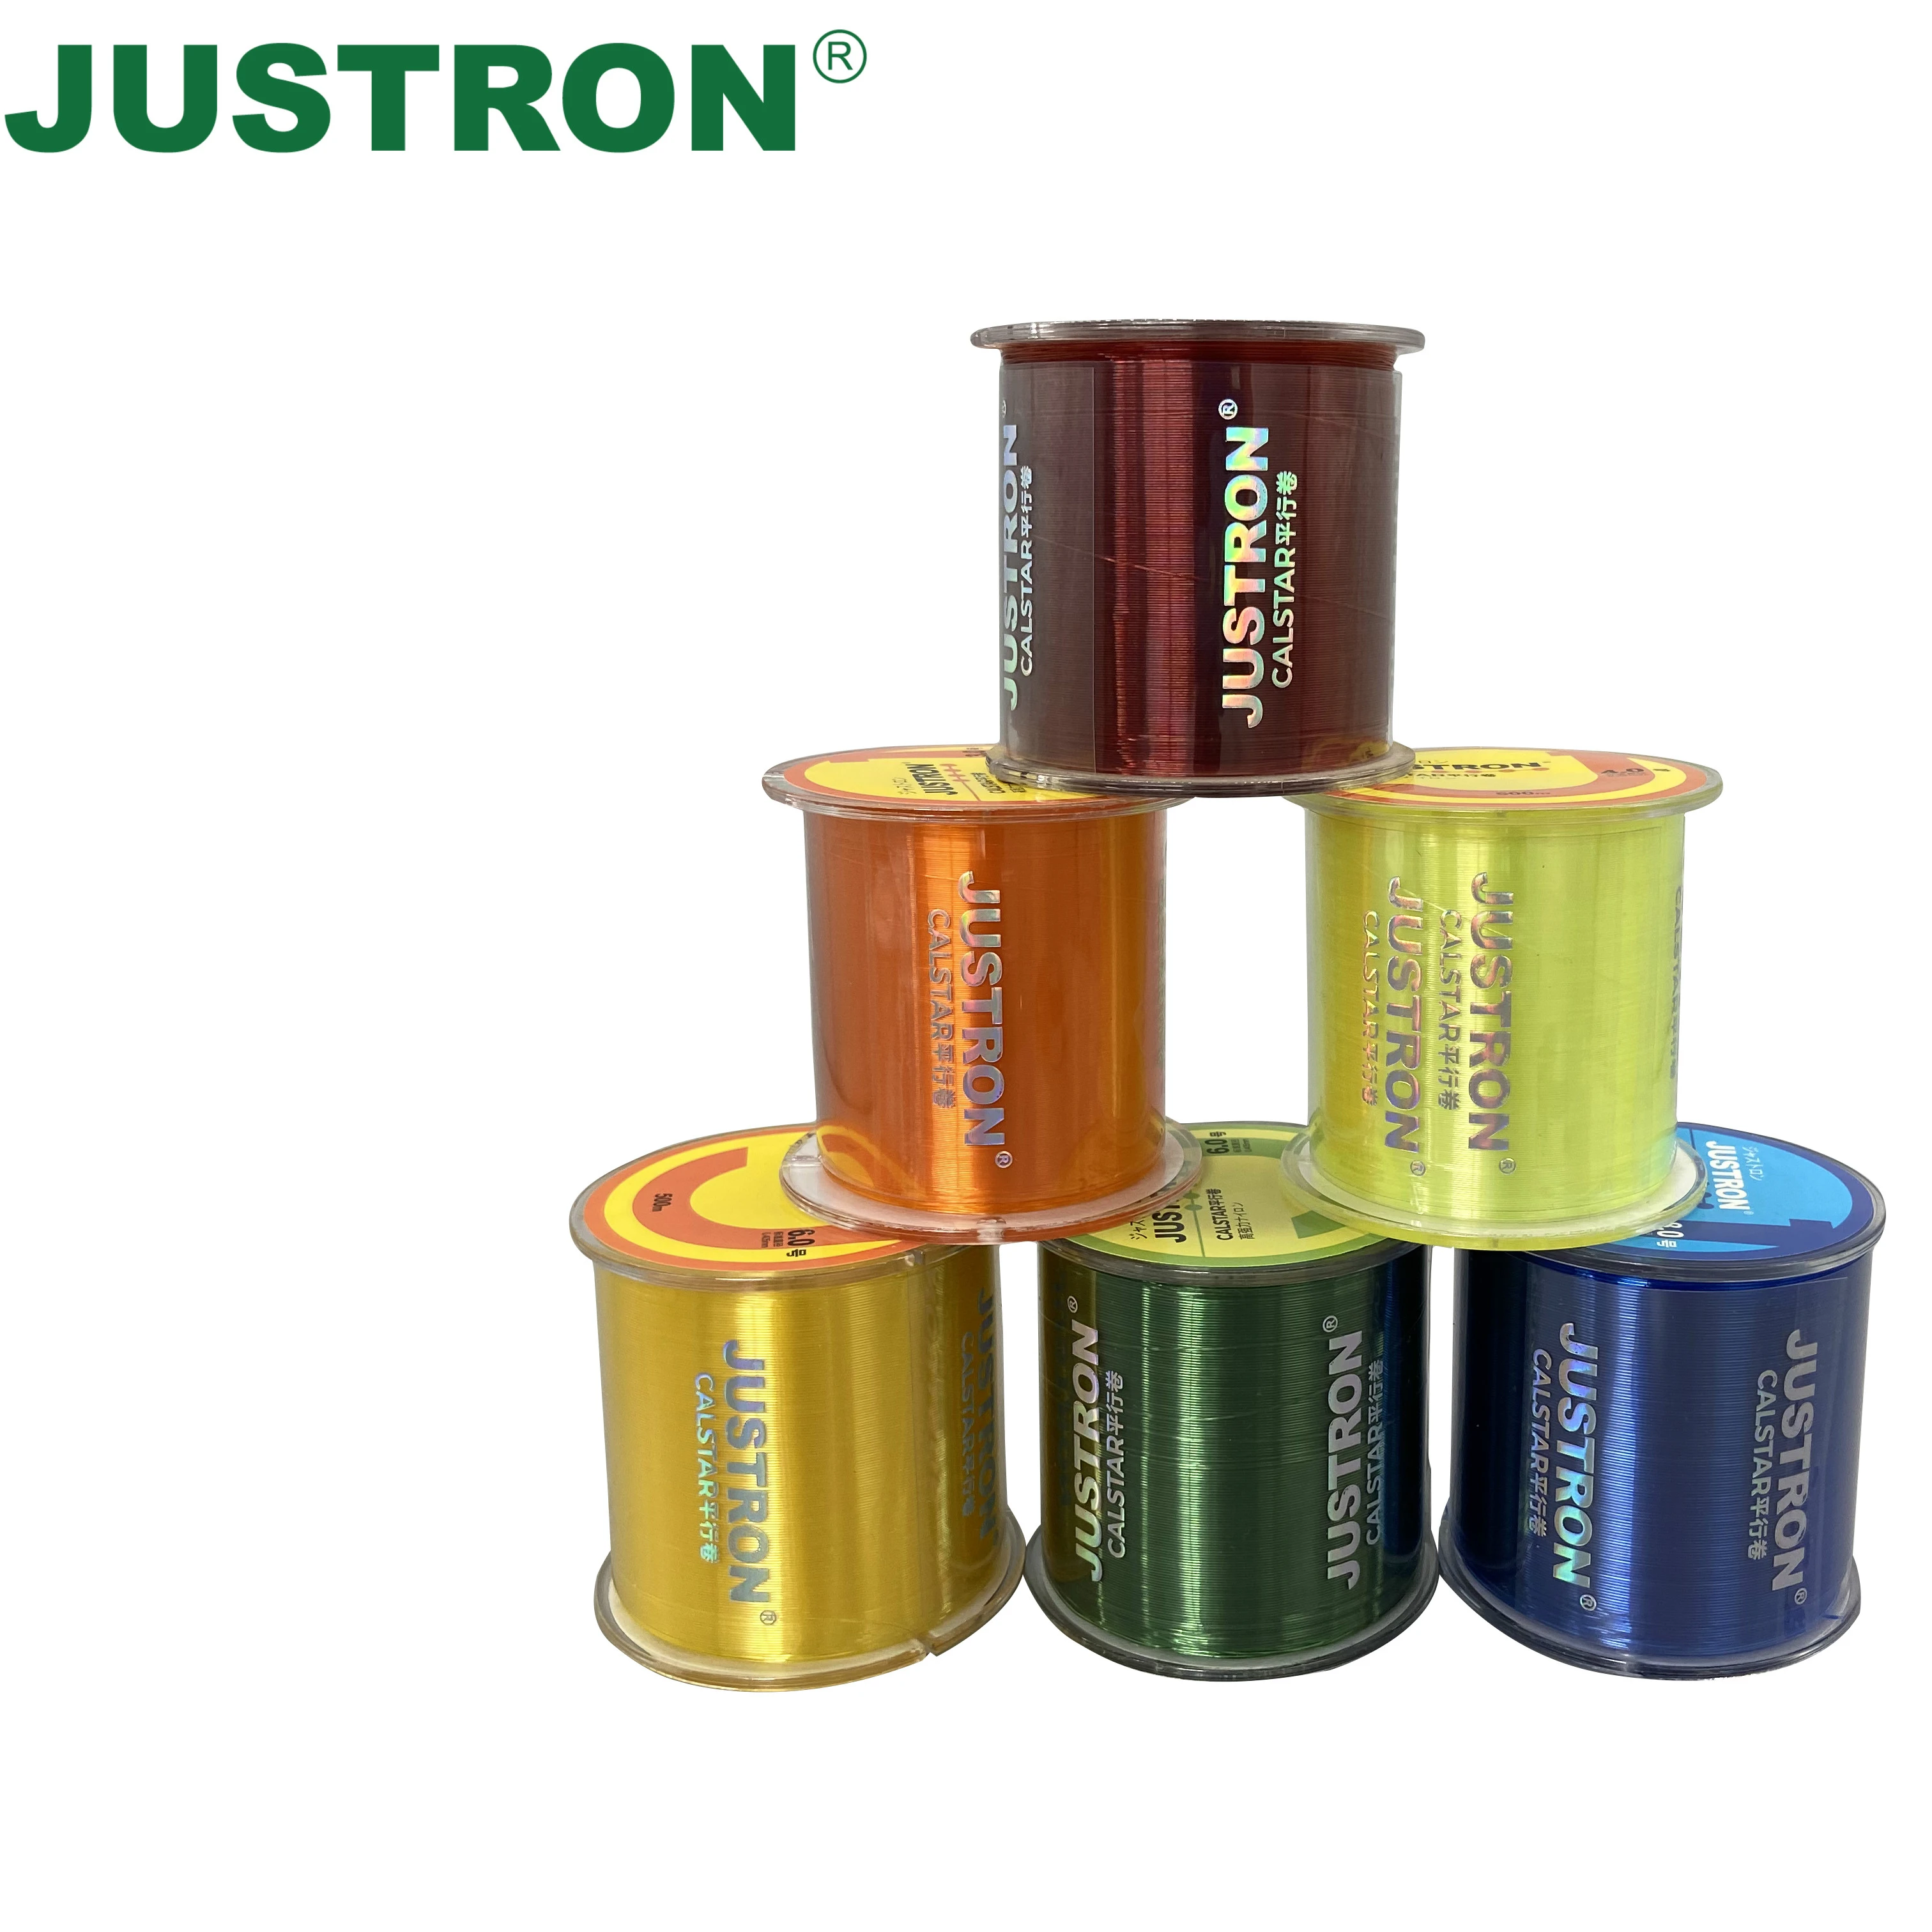 

Justron High Quality Wholesale All Size 500m Sea Fishing Line MultiColor Super Strong Nylon Fishing Line, Multicolor or custom